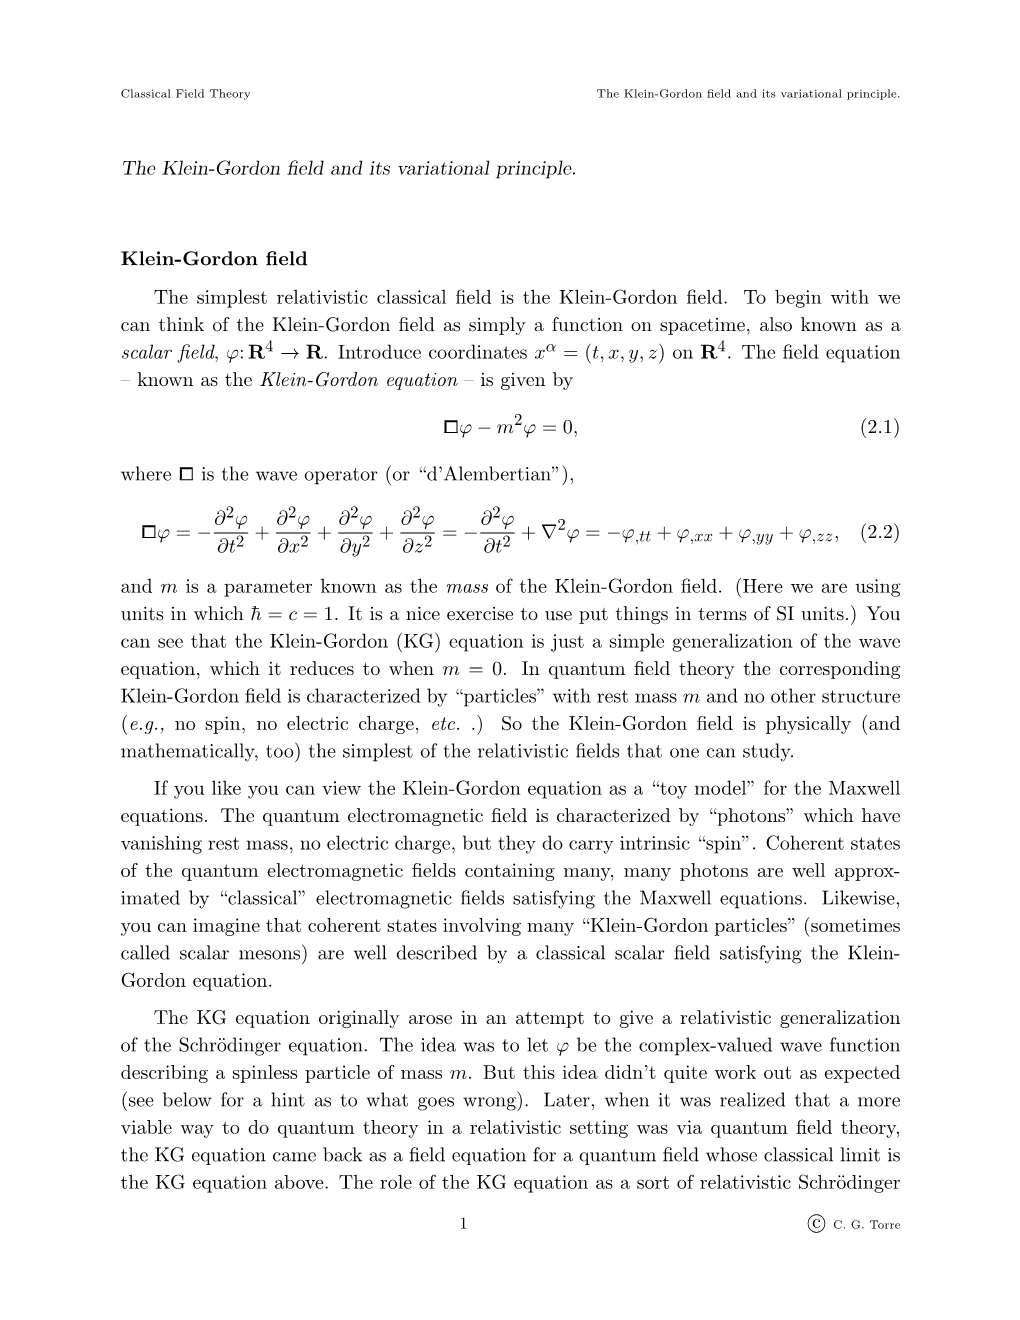 The Klein-Gordon Field and Its Variational Principle